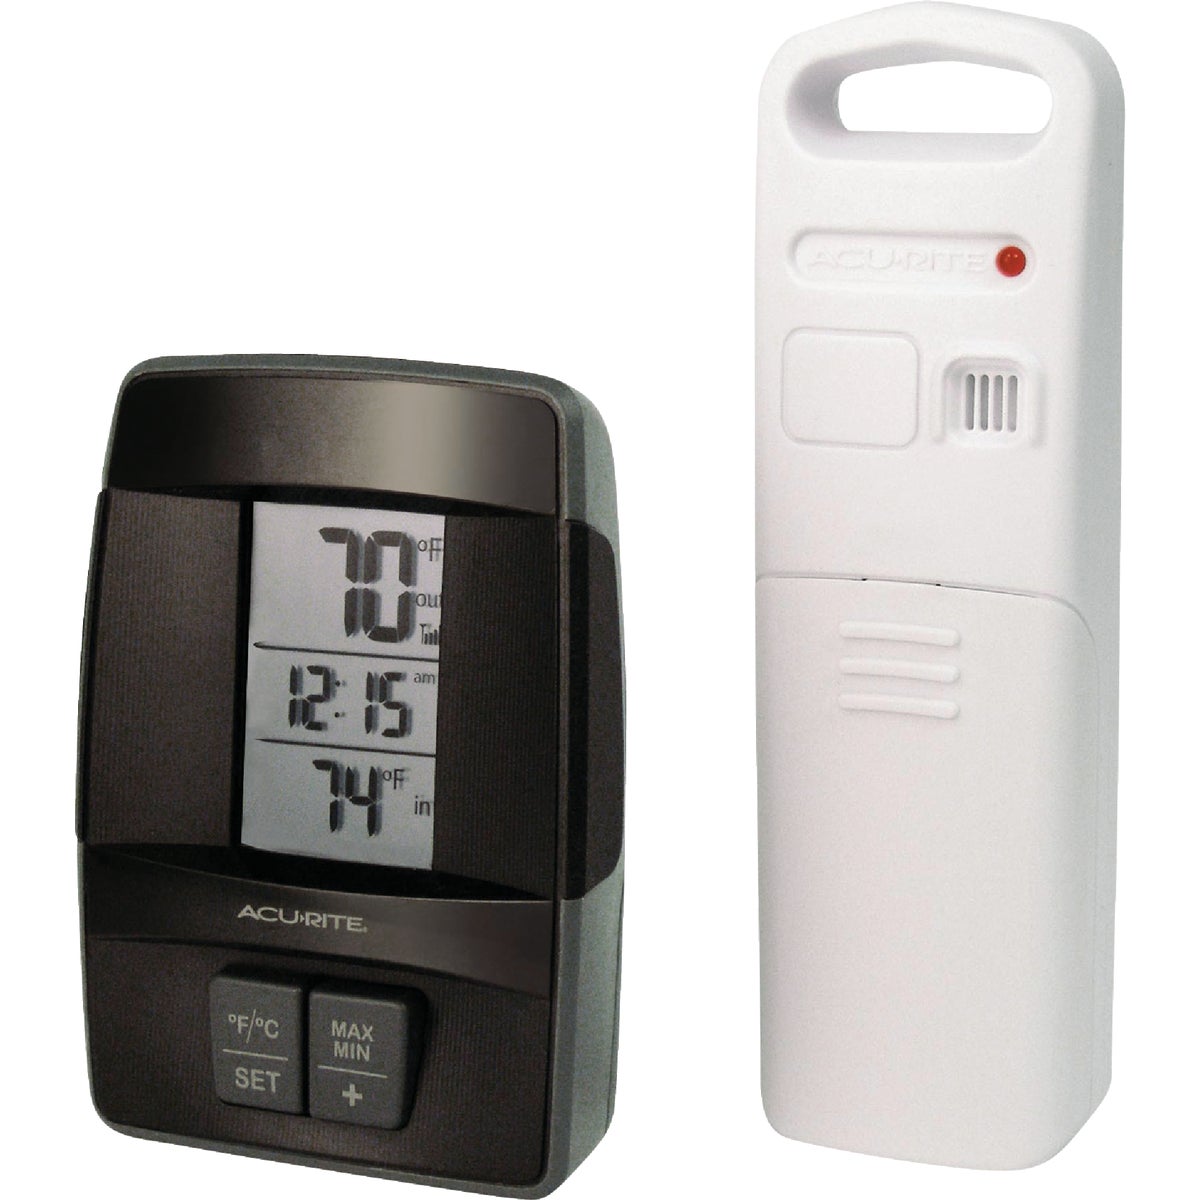 Item 653322, Wireless indoor and outdoor thermometer features temperature readings in 